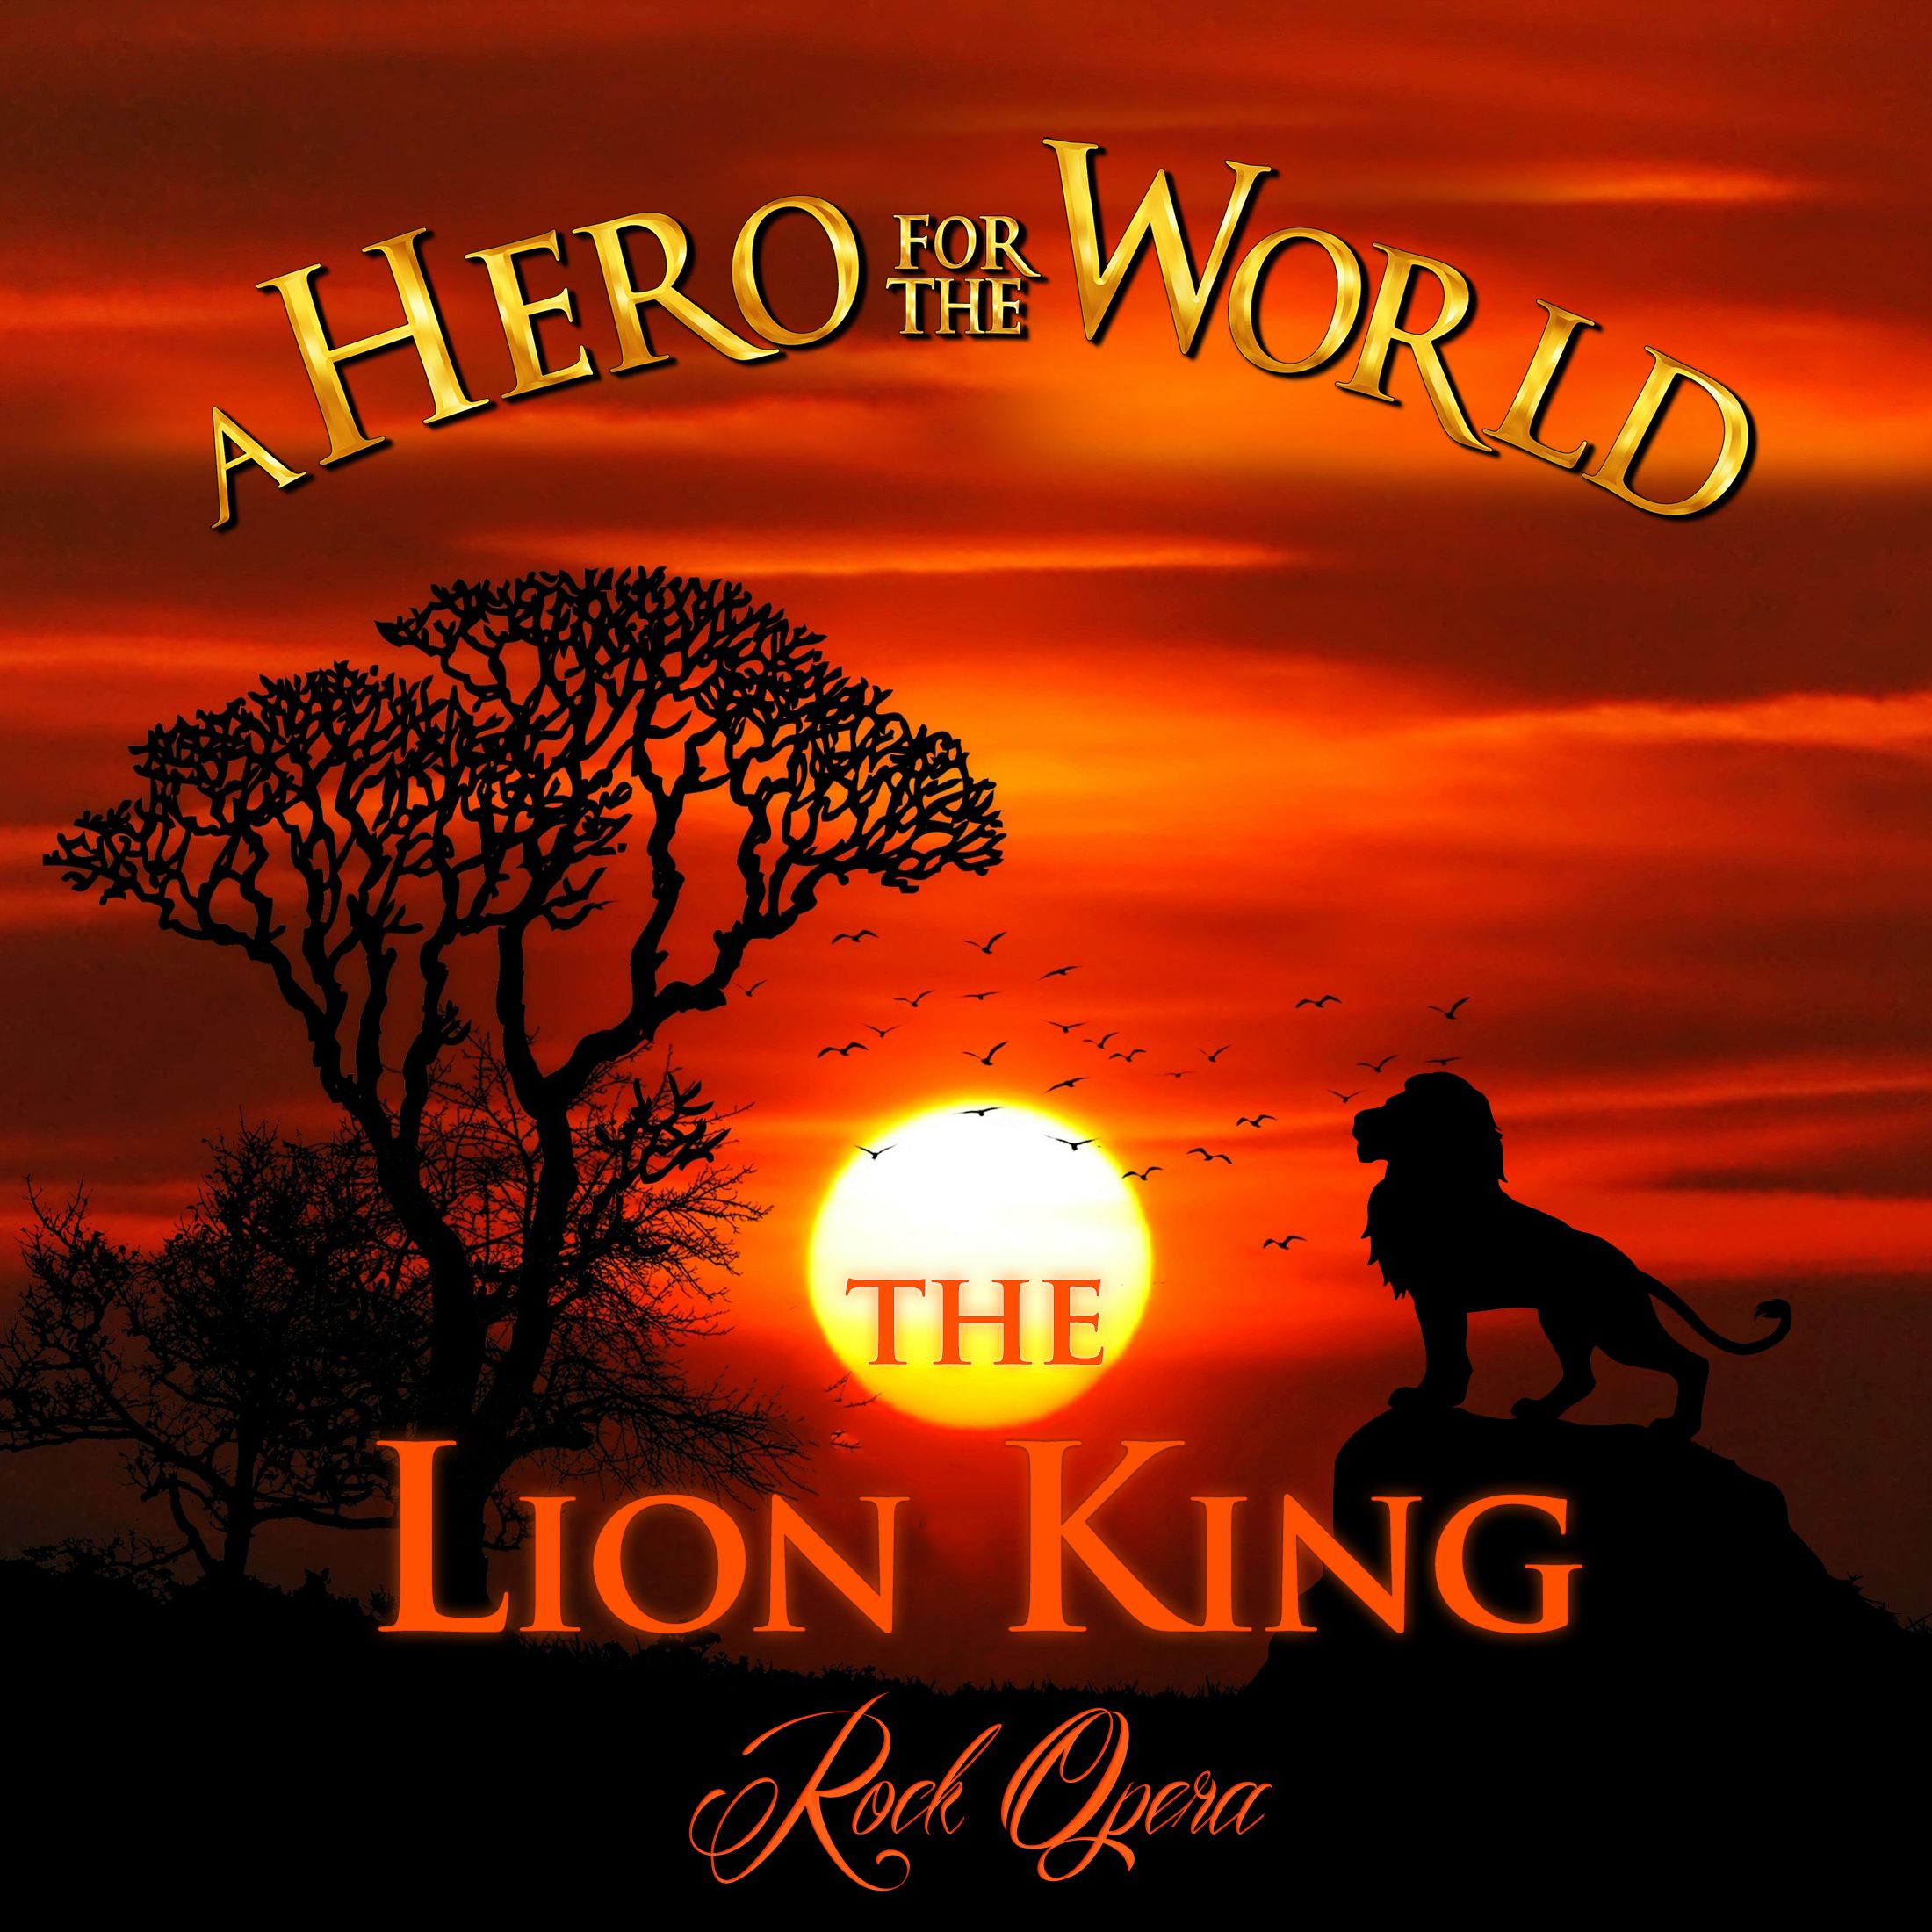 The Lion King Rock Opera - A HERO FOR THE WORLD